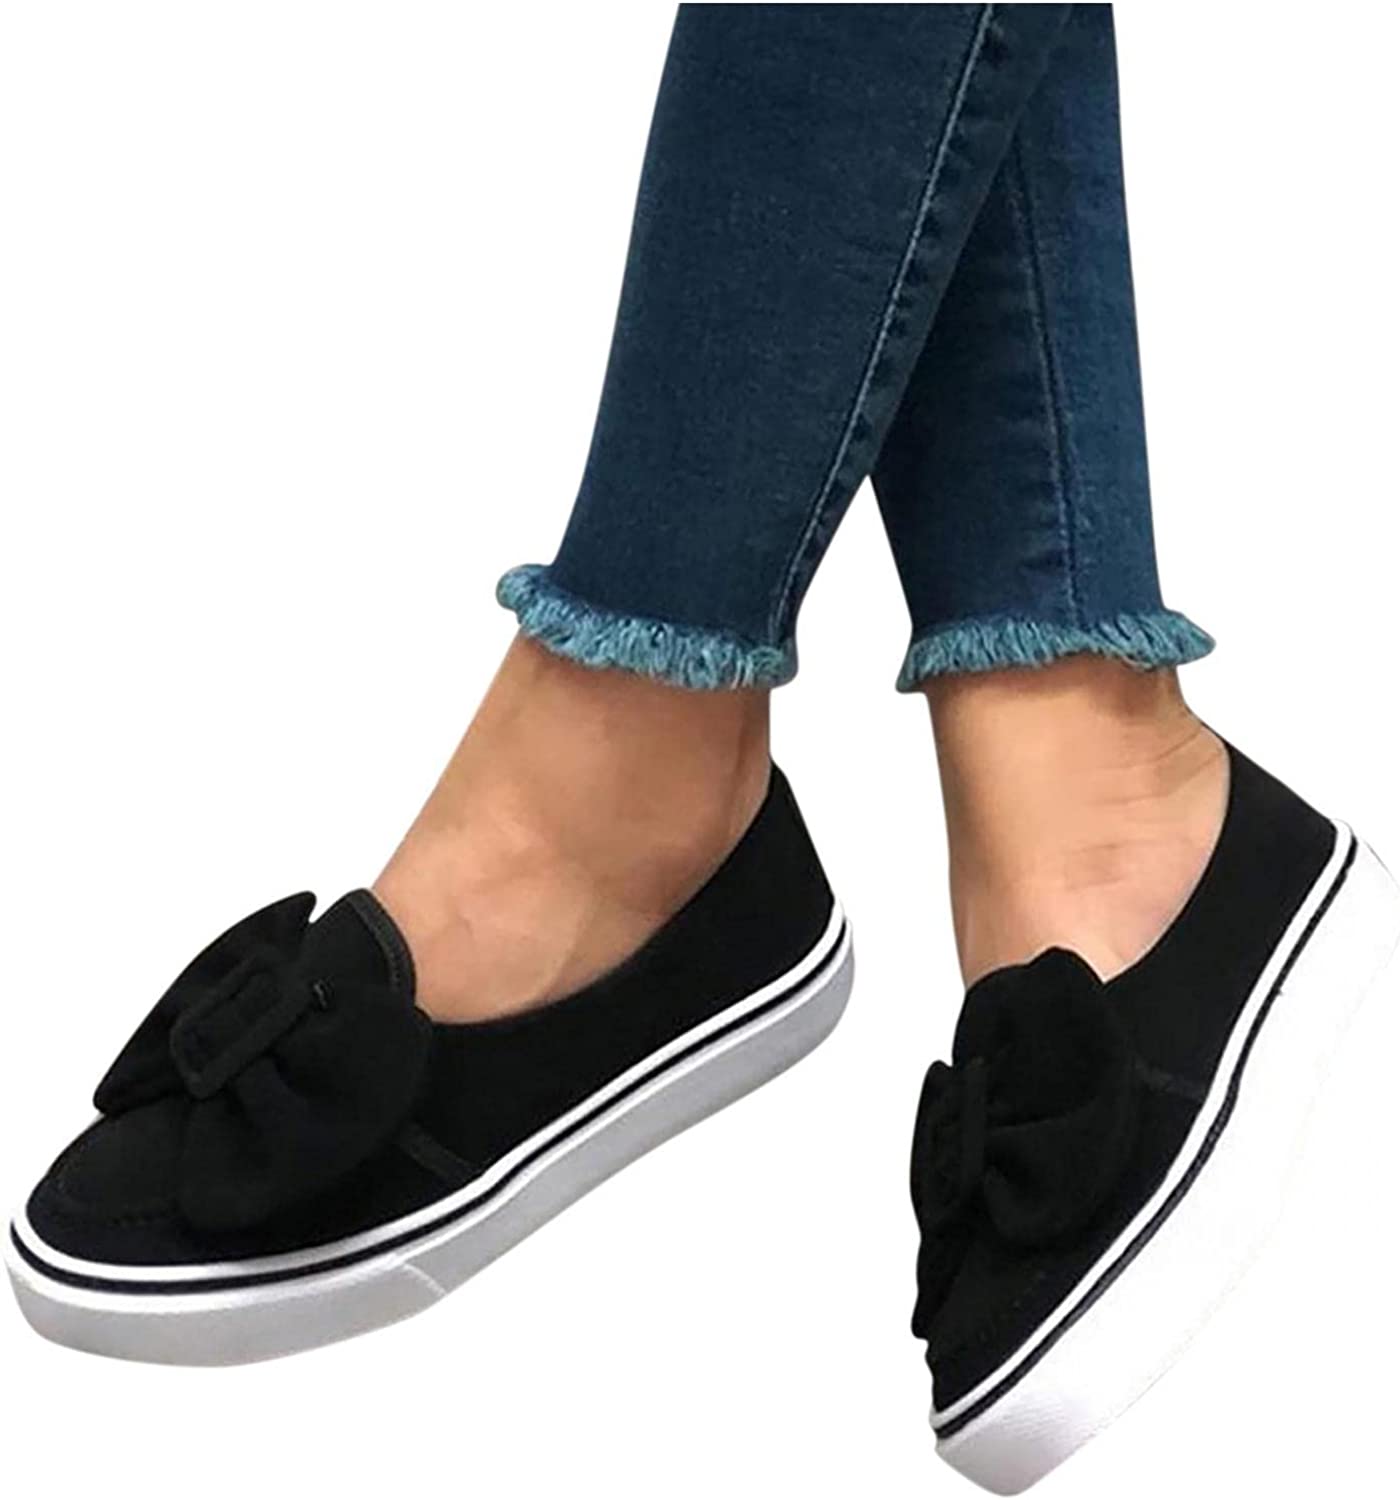 Wedge Sneakers for Women Leather Comfortable Slip on Canvas Fashion Sneakers Bow Loafers Flat Casual Shoes for Walking